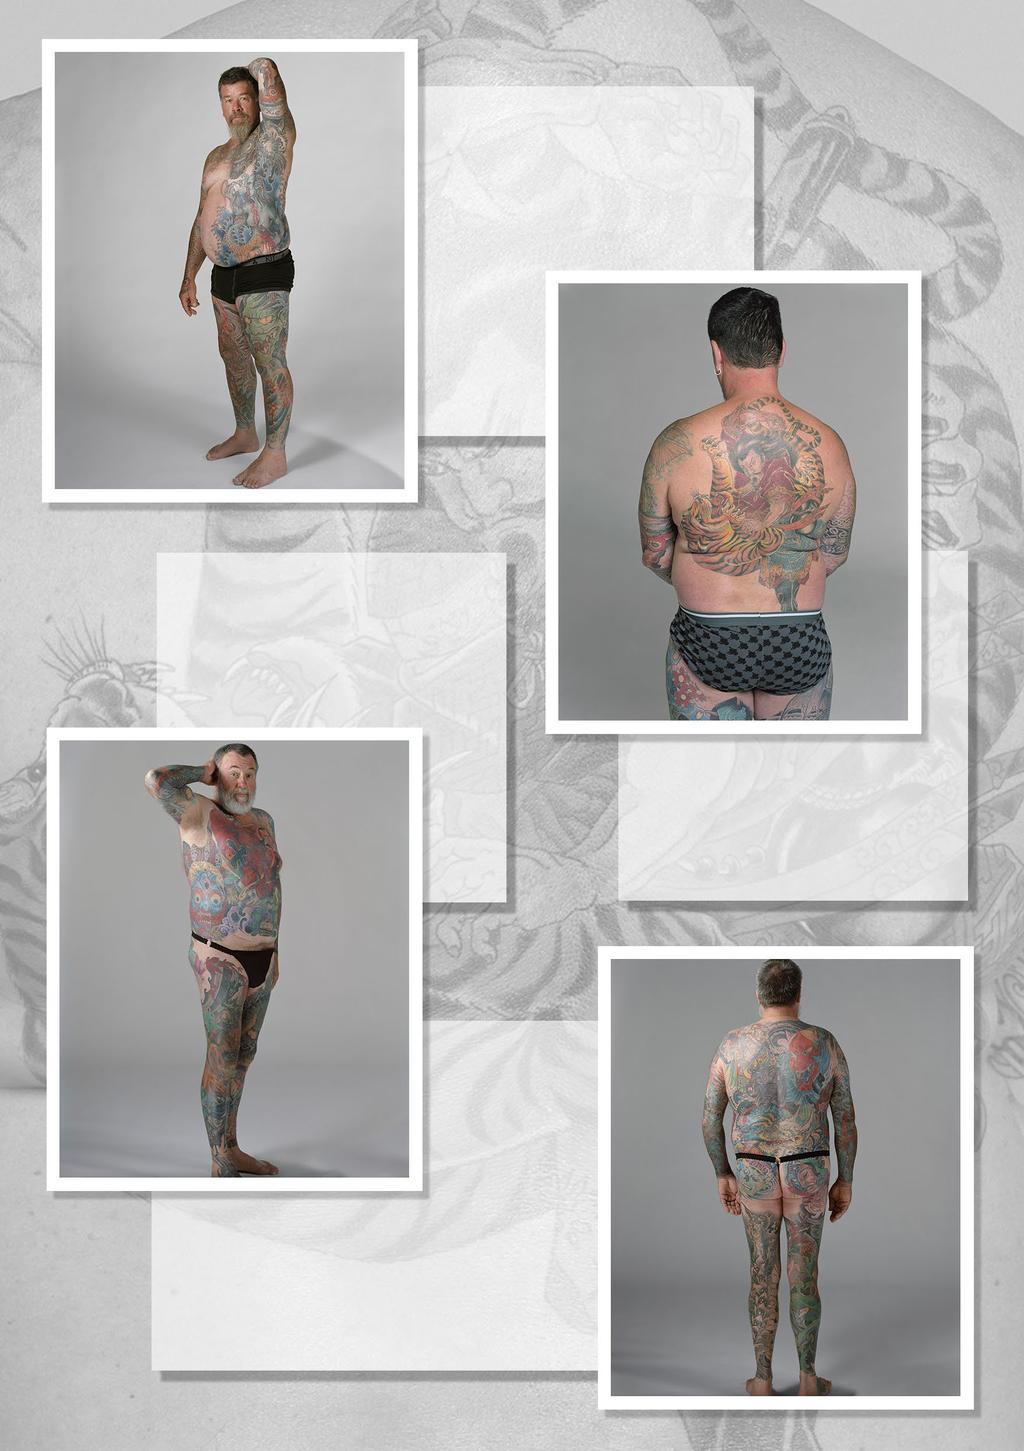 Gavin Gavin s body project represents a long-term tattoo relationship with Rod Dawson at Stained Skin Tattooist Rod Dawson, Stained Skin Steve Steve s tattoos represent decades of work and his first